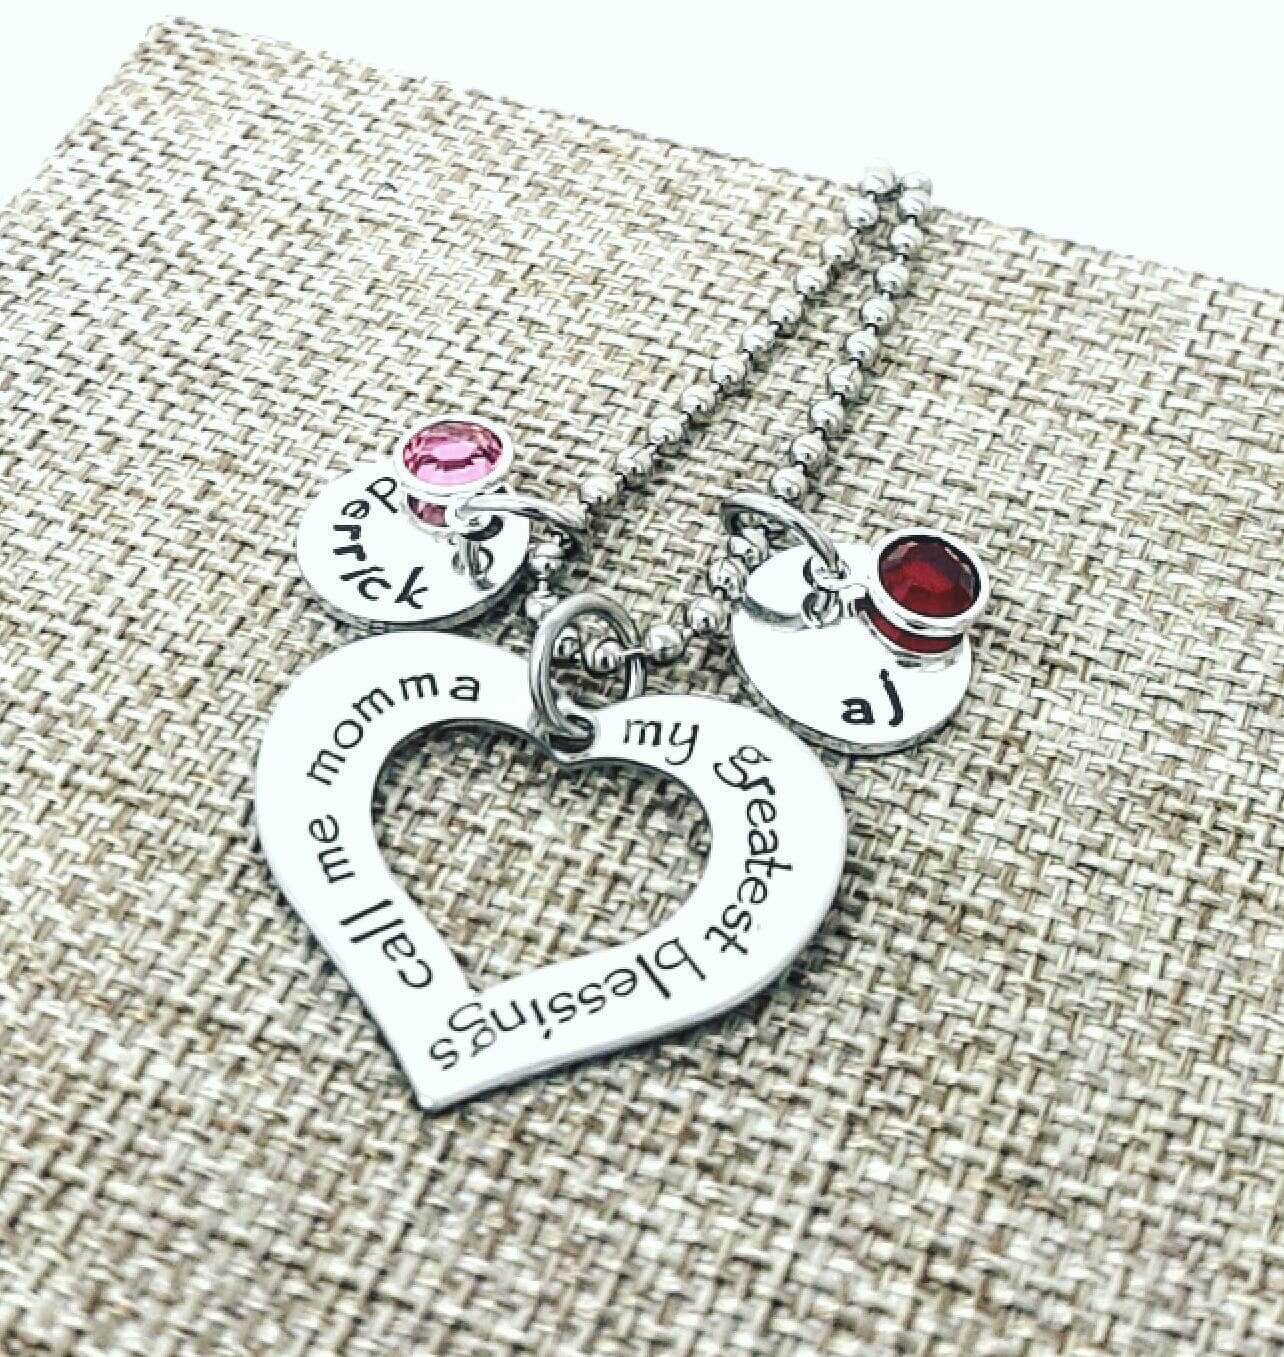 Mother's Necklace, Greatest Blessings, Birthstone Jewelry, Childrens Names Necklace, Mother's Gif, Necklaces, HandmadeLoveStories, HandmadeLoveStories , [Handmade_Love_Stories], [Hand_Stamped_Jewelry], [Etsy_Stamped_Jewelry], [Etsy_Jewelry]